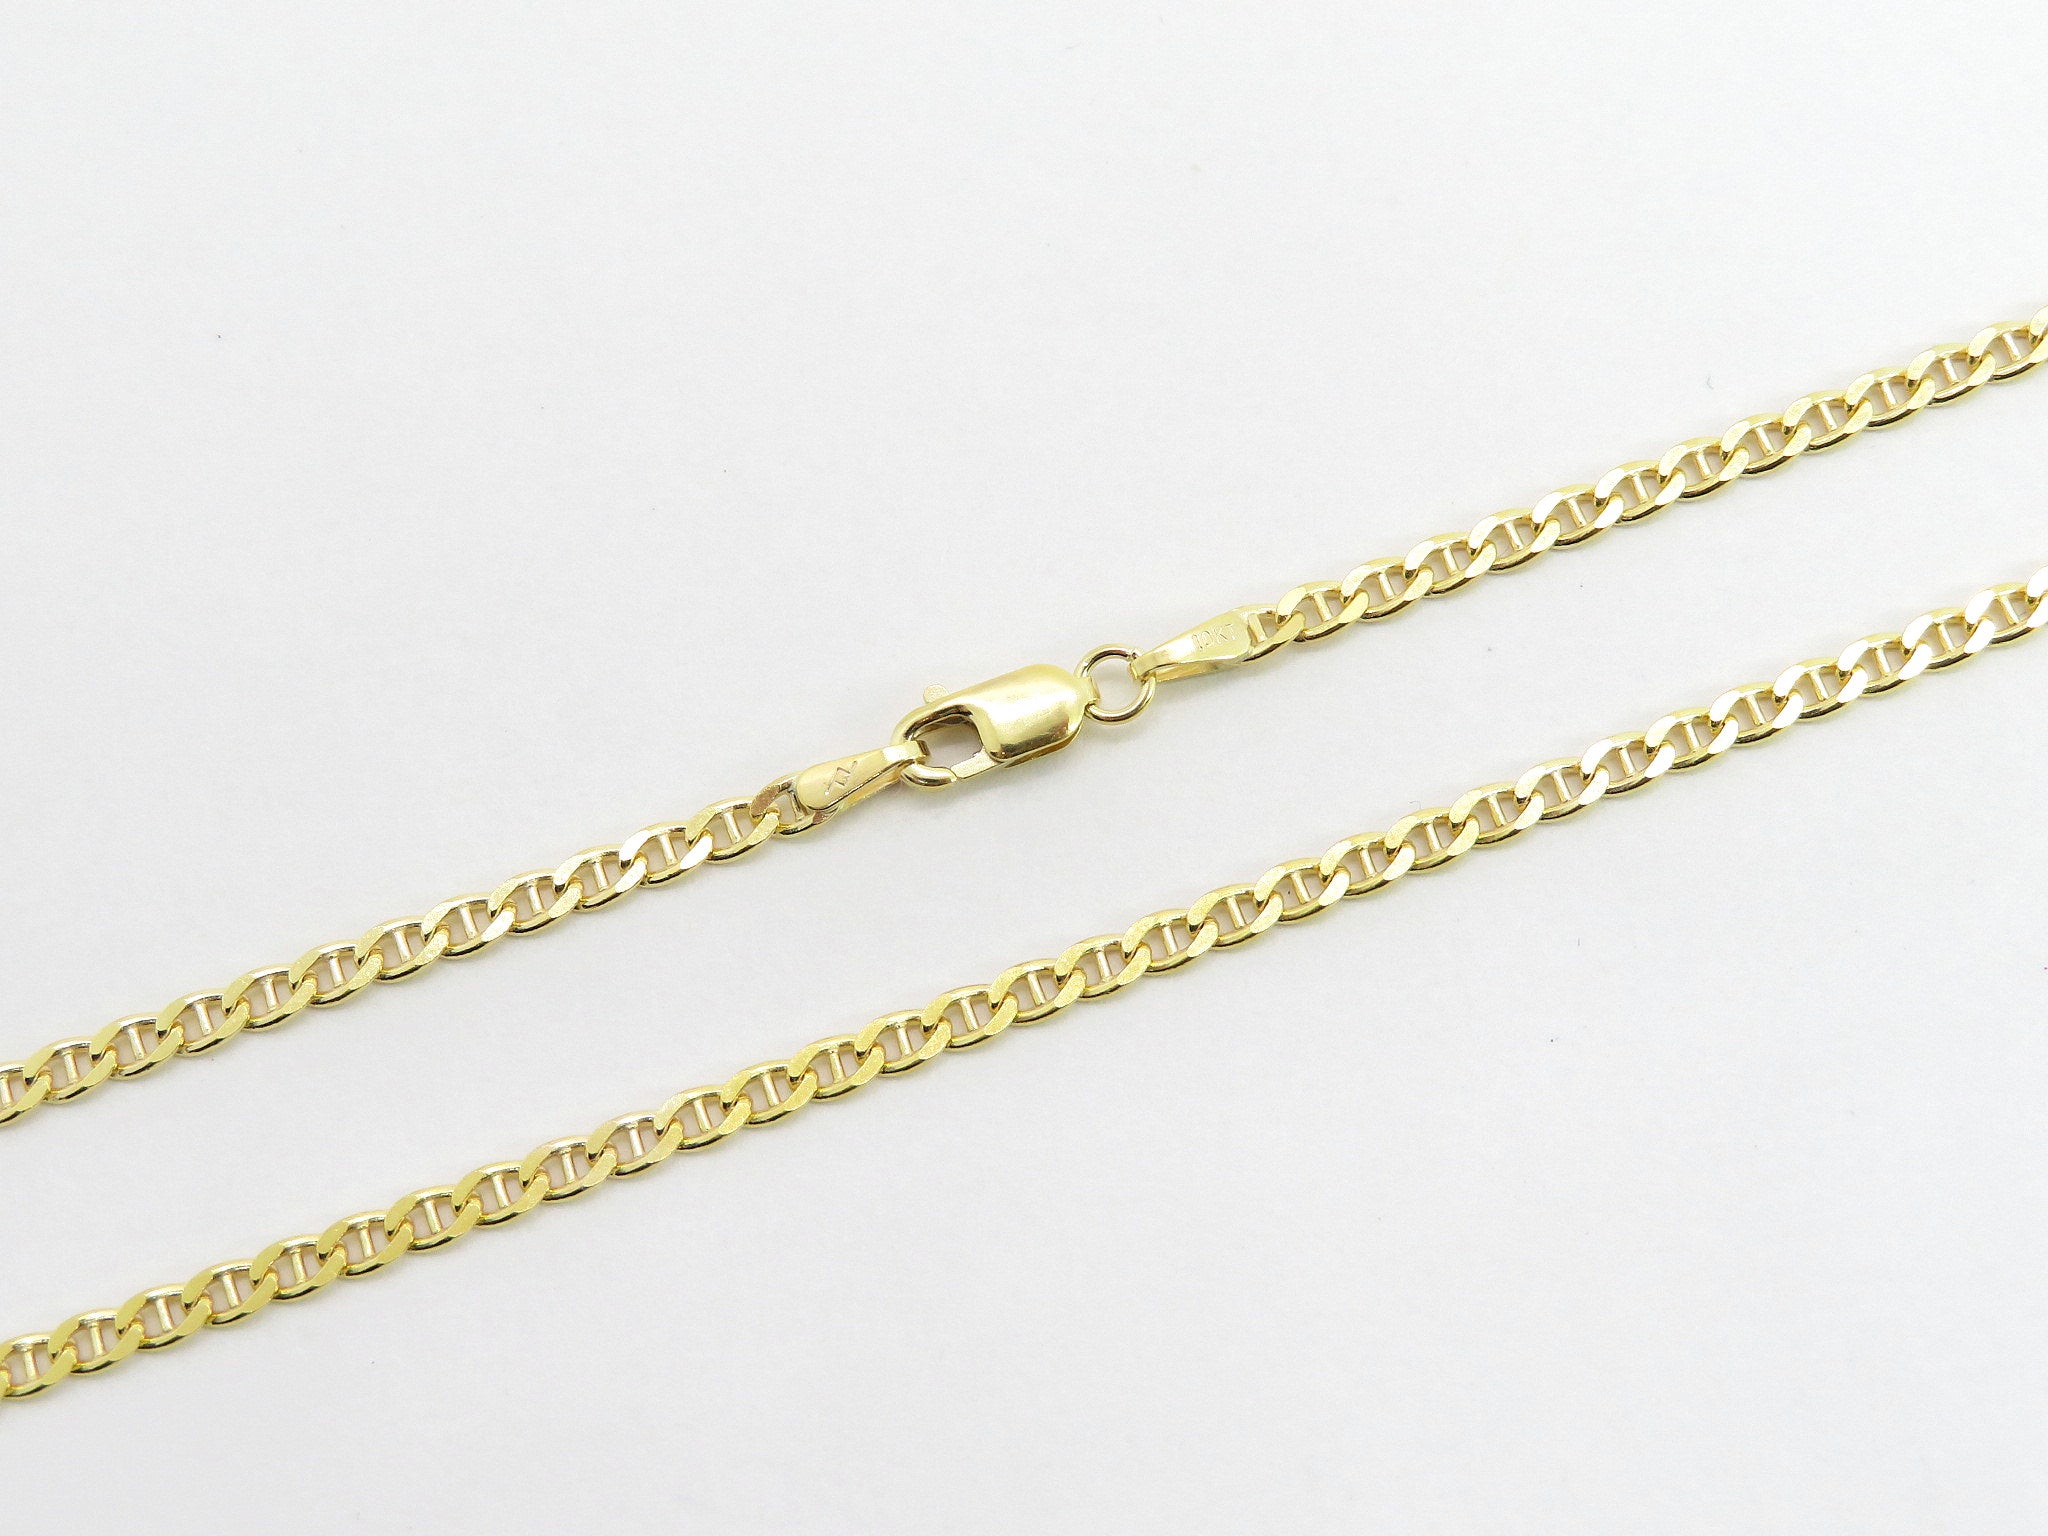 14k Gold Over Solid 925 Sterling Silver Figaro Chain Or Bracelet ITALY  4-10mm